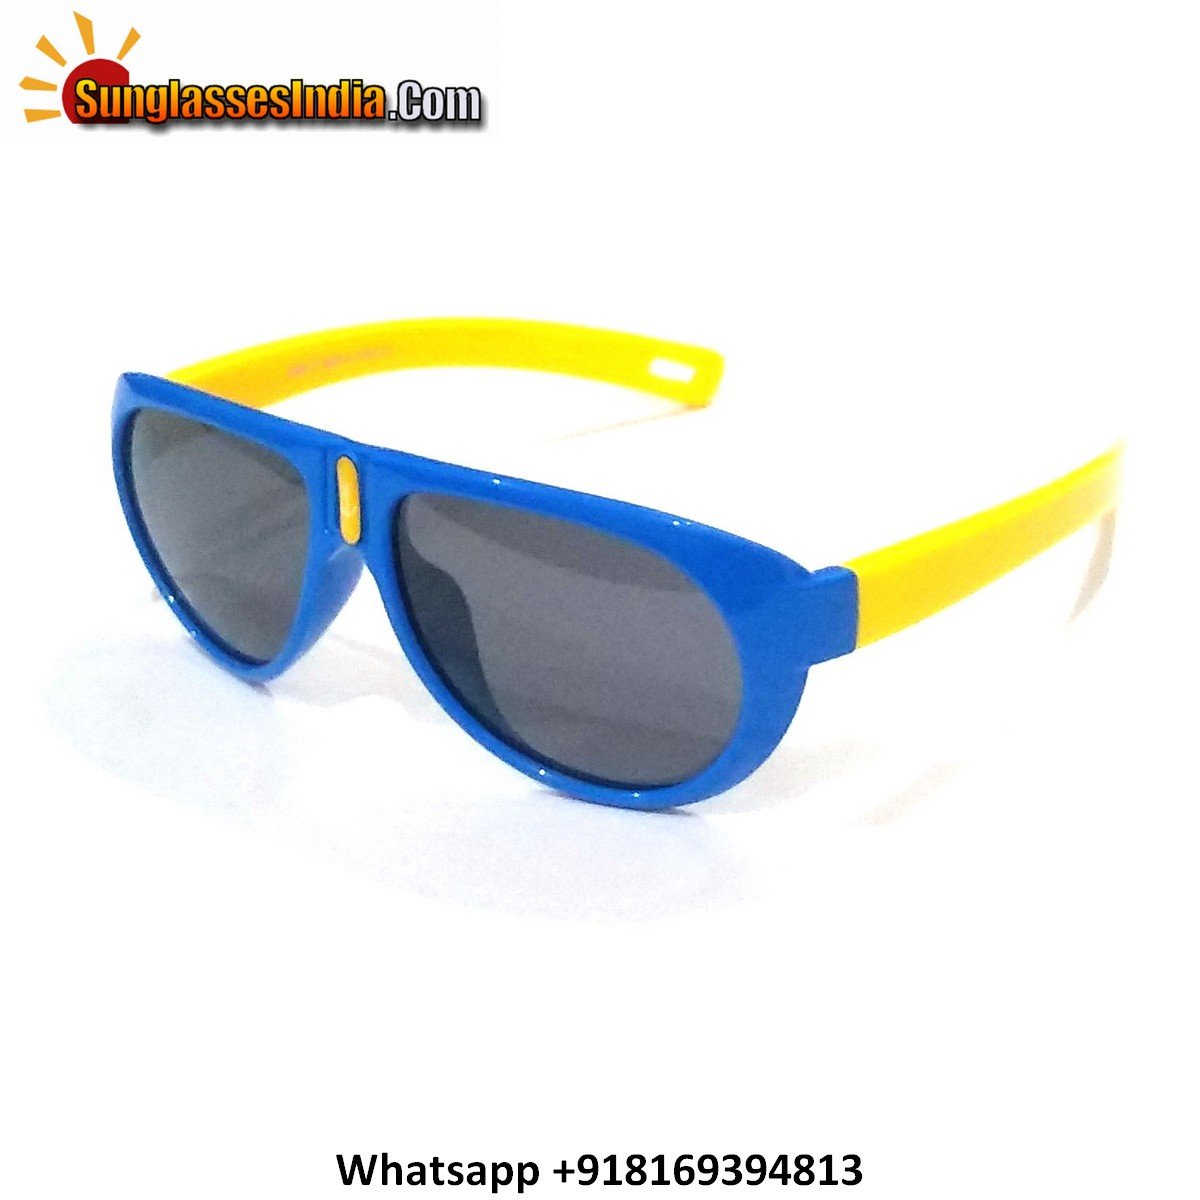 Unbreakable Kids Polarized Sunglasses Light Weight TR Material S824BlueYlw